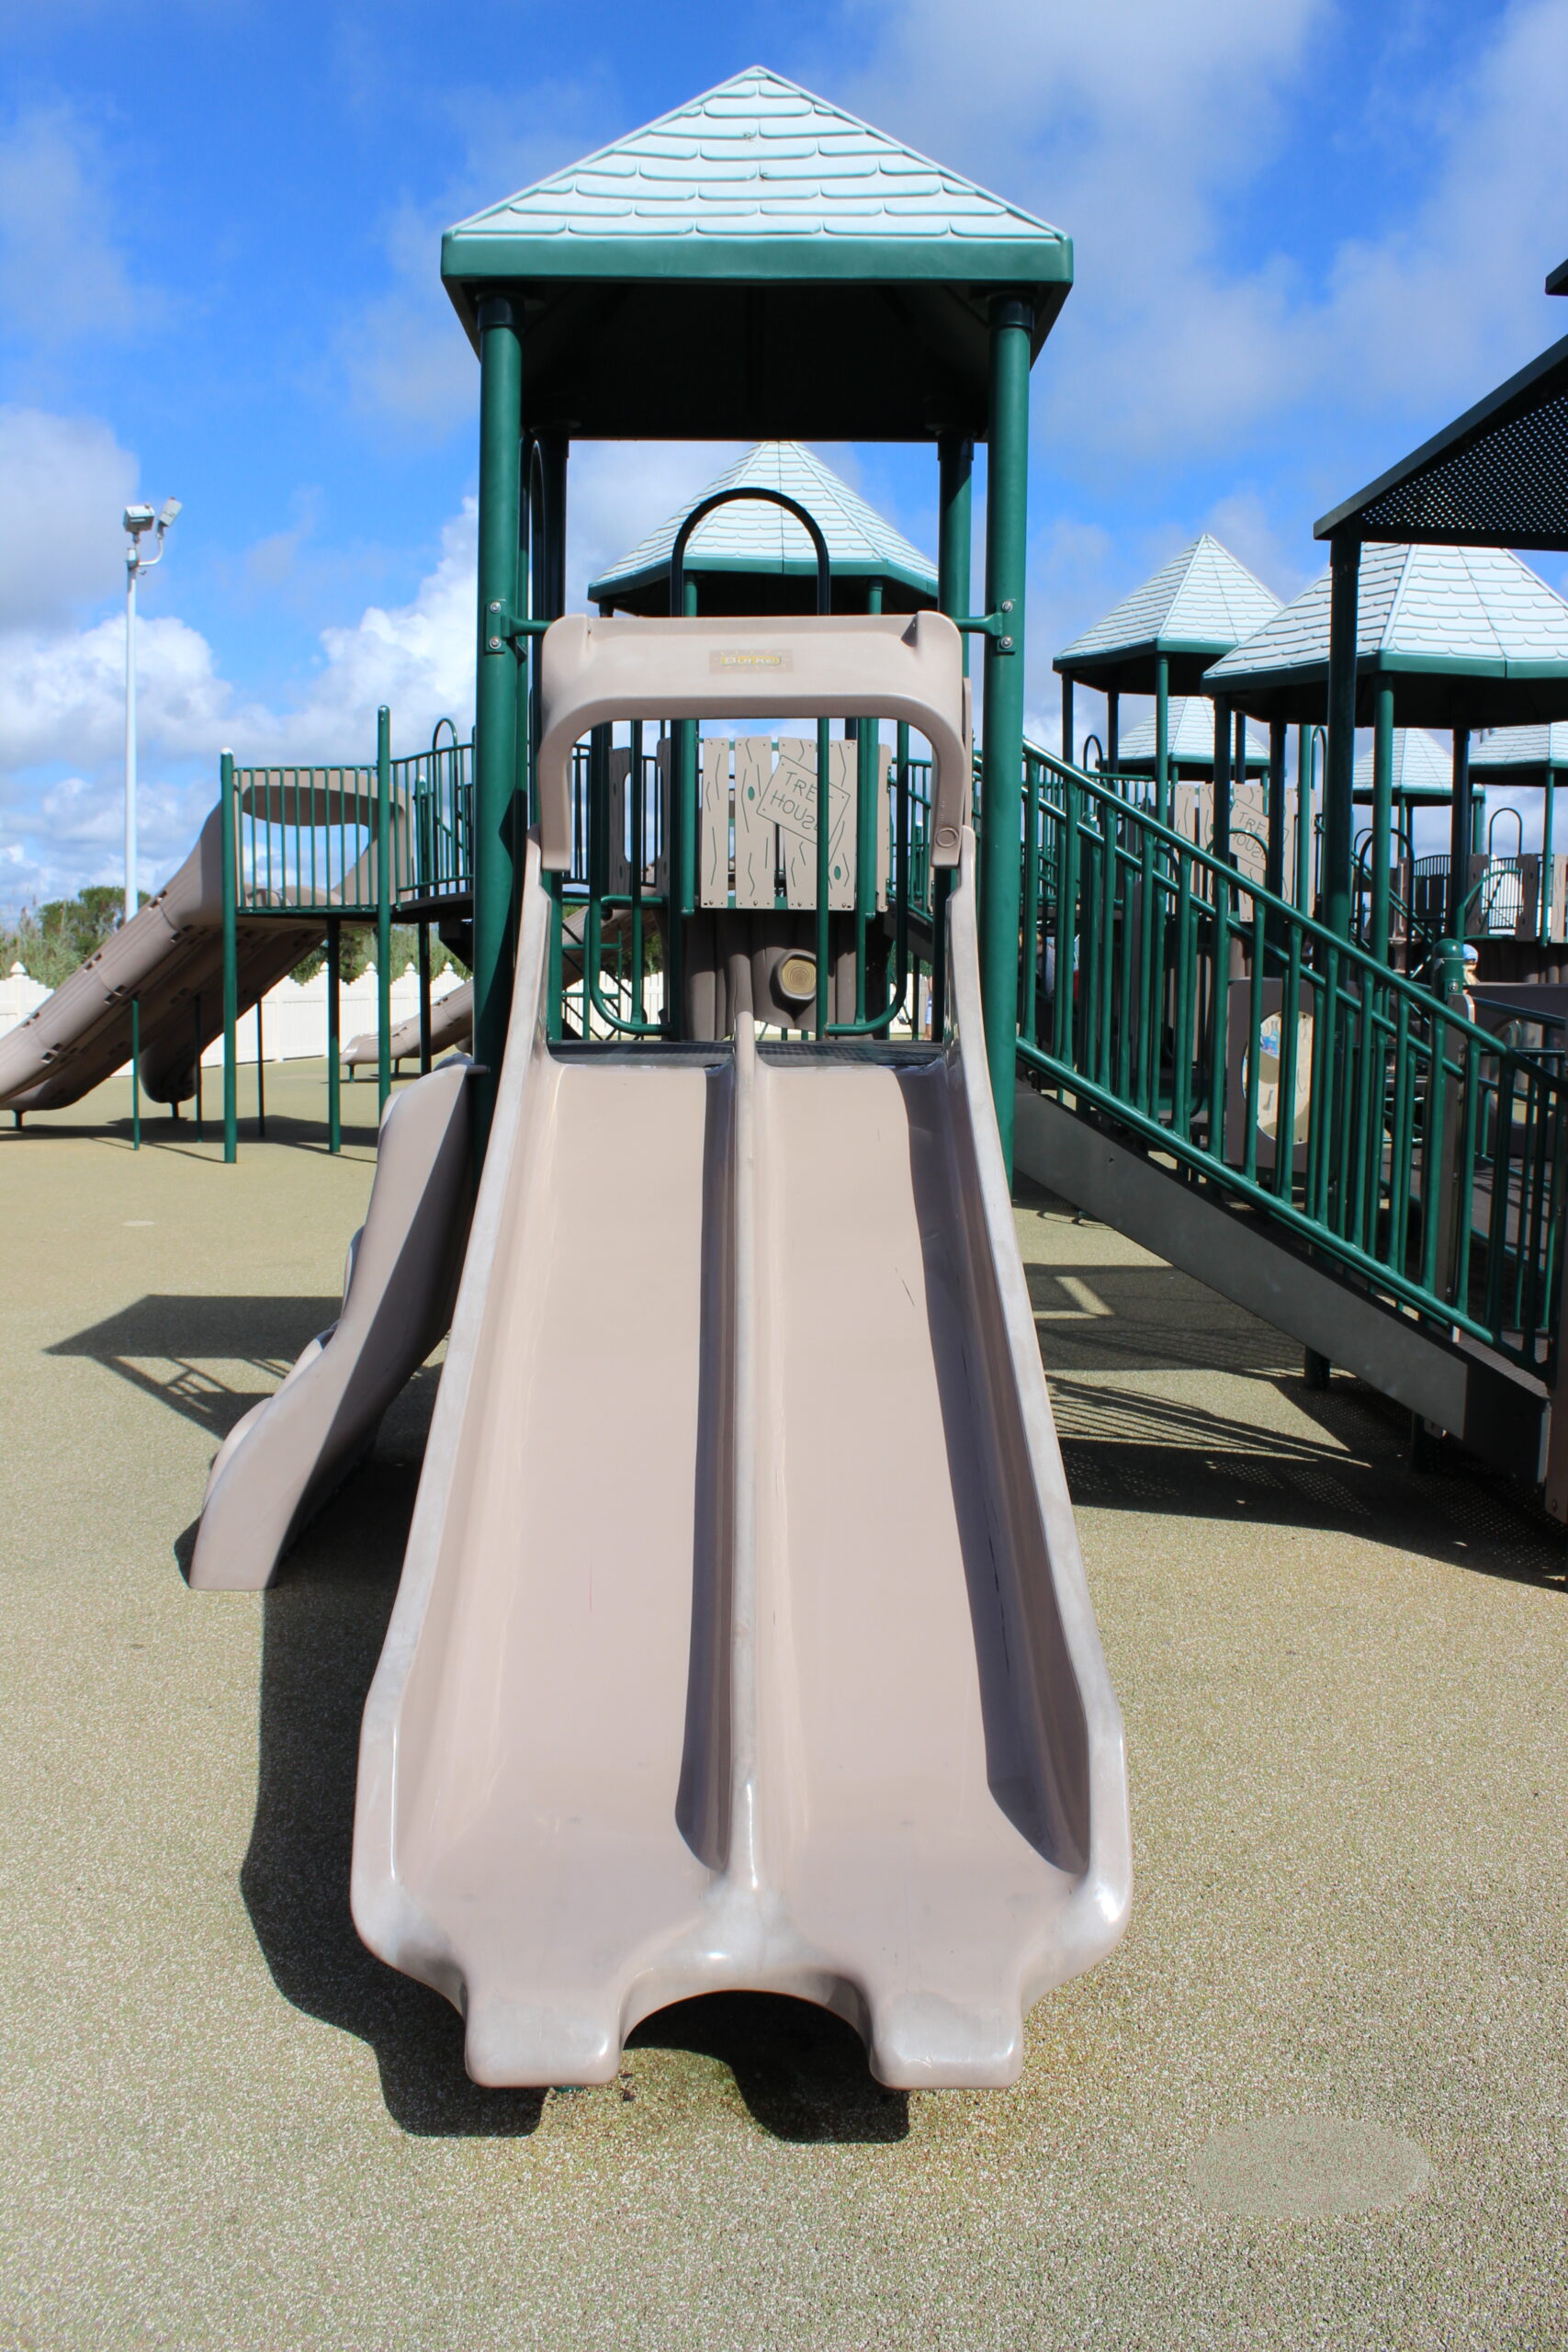 Dealy Field Playground in Sea Isle City NJ - SLIDES - side by side tan straight slides